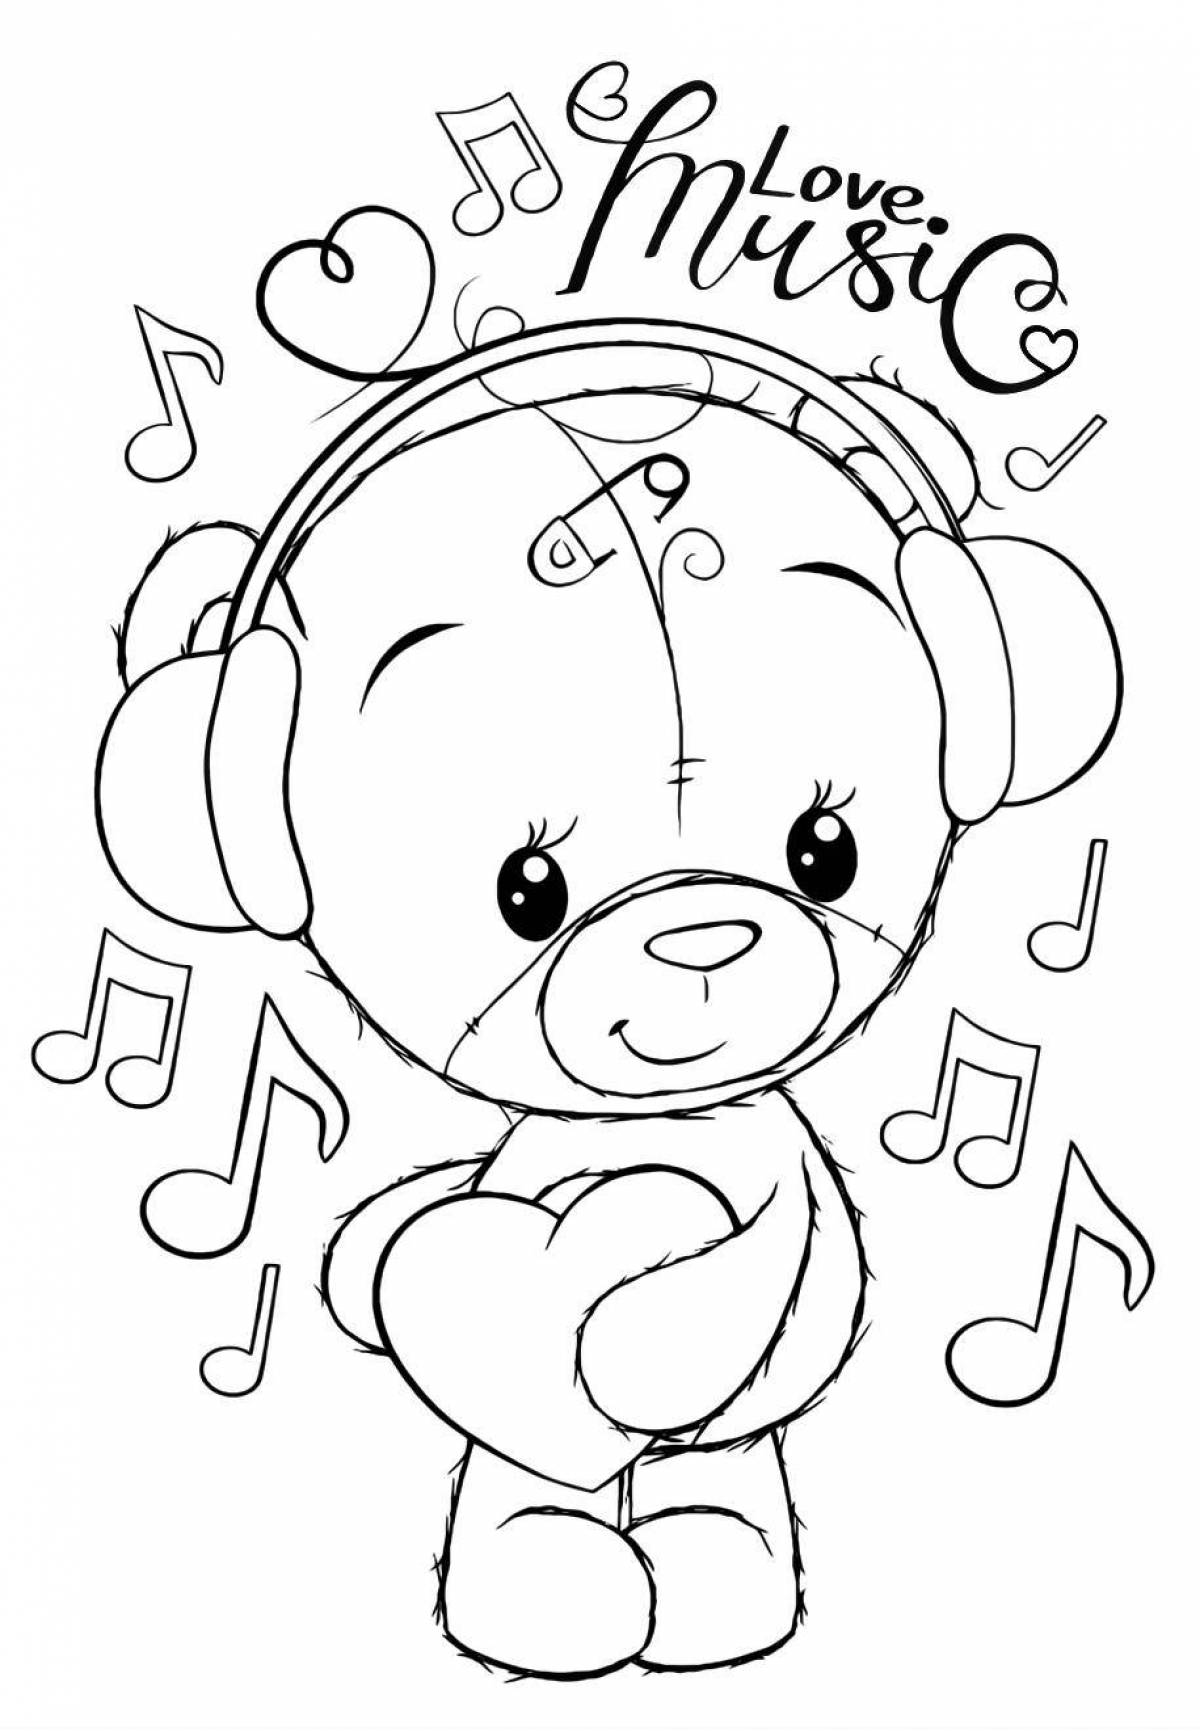 Naughty teddy bear coloring page